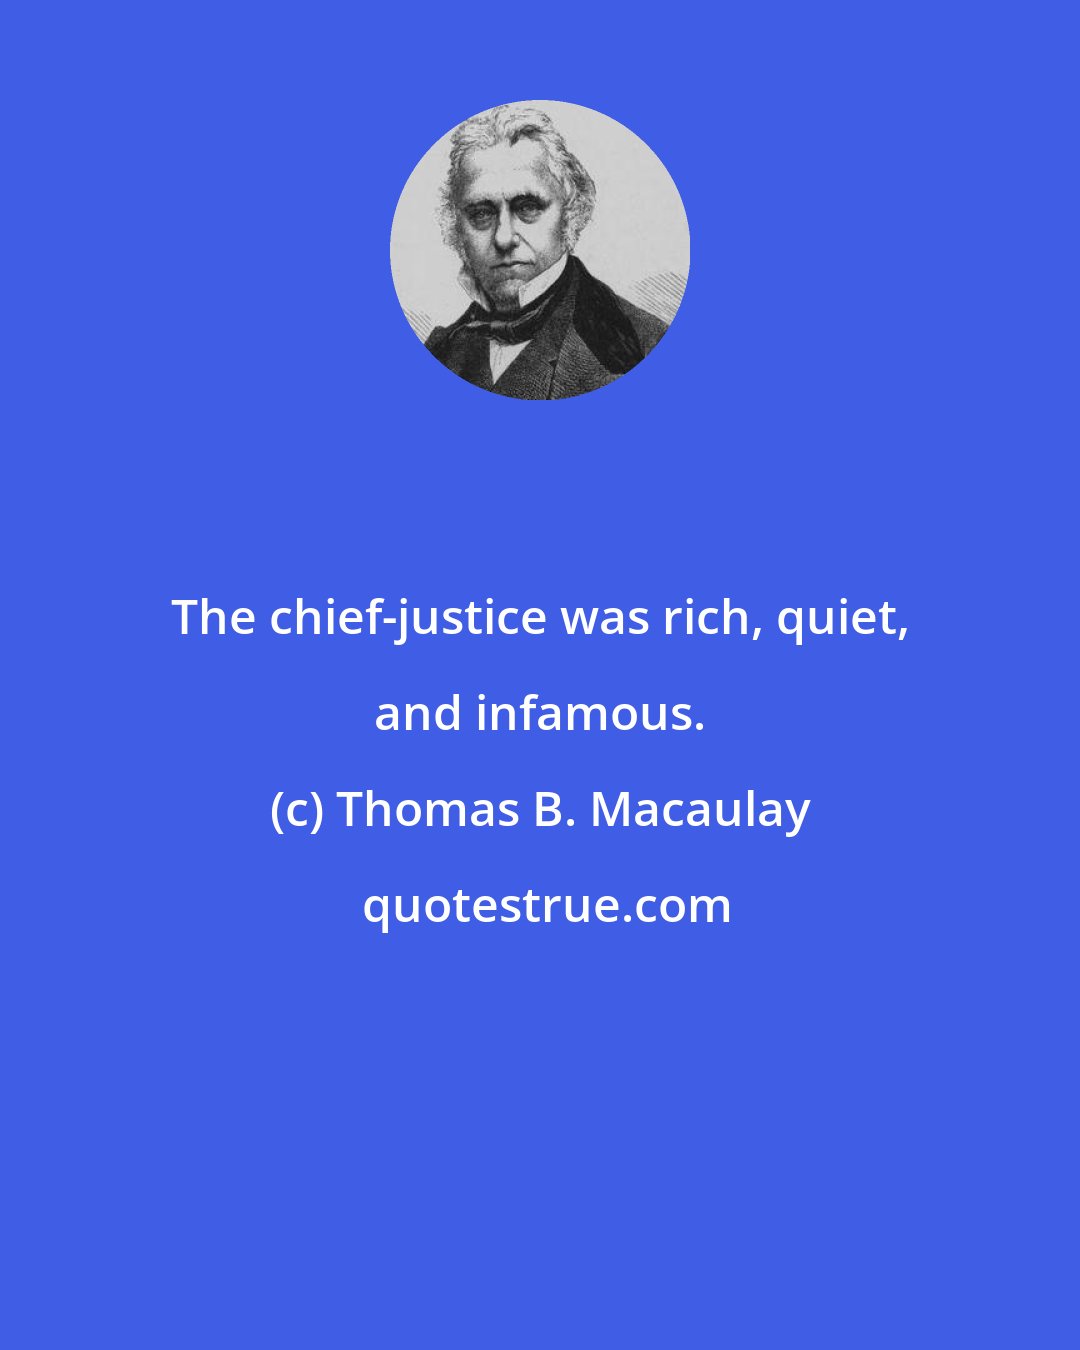 Thomas B. Macaulay: The chief-justice was rich, quiet, and infamous.